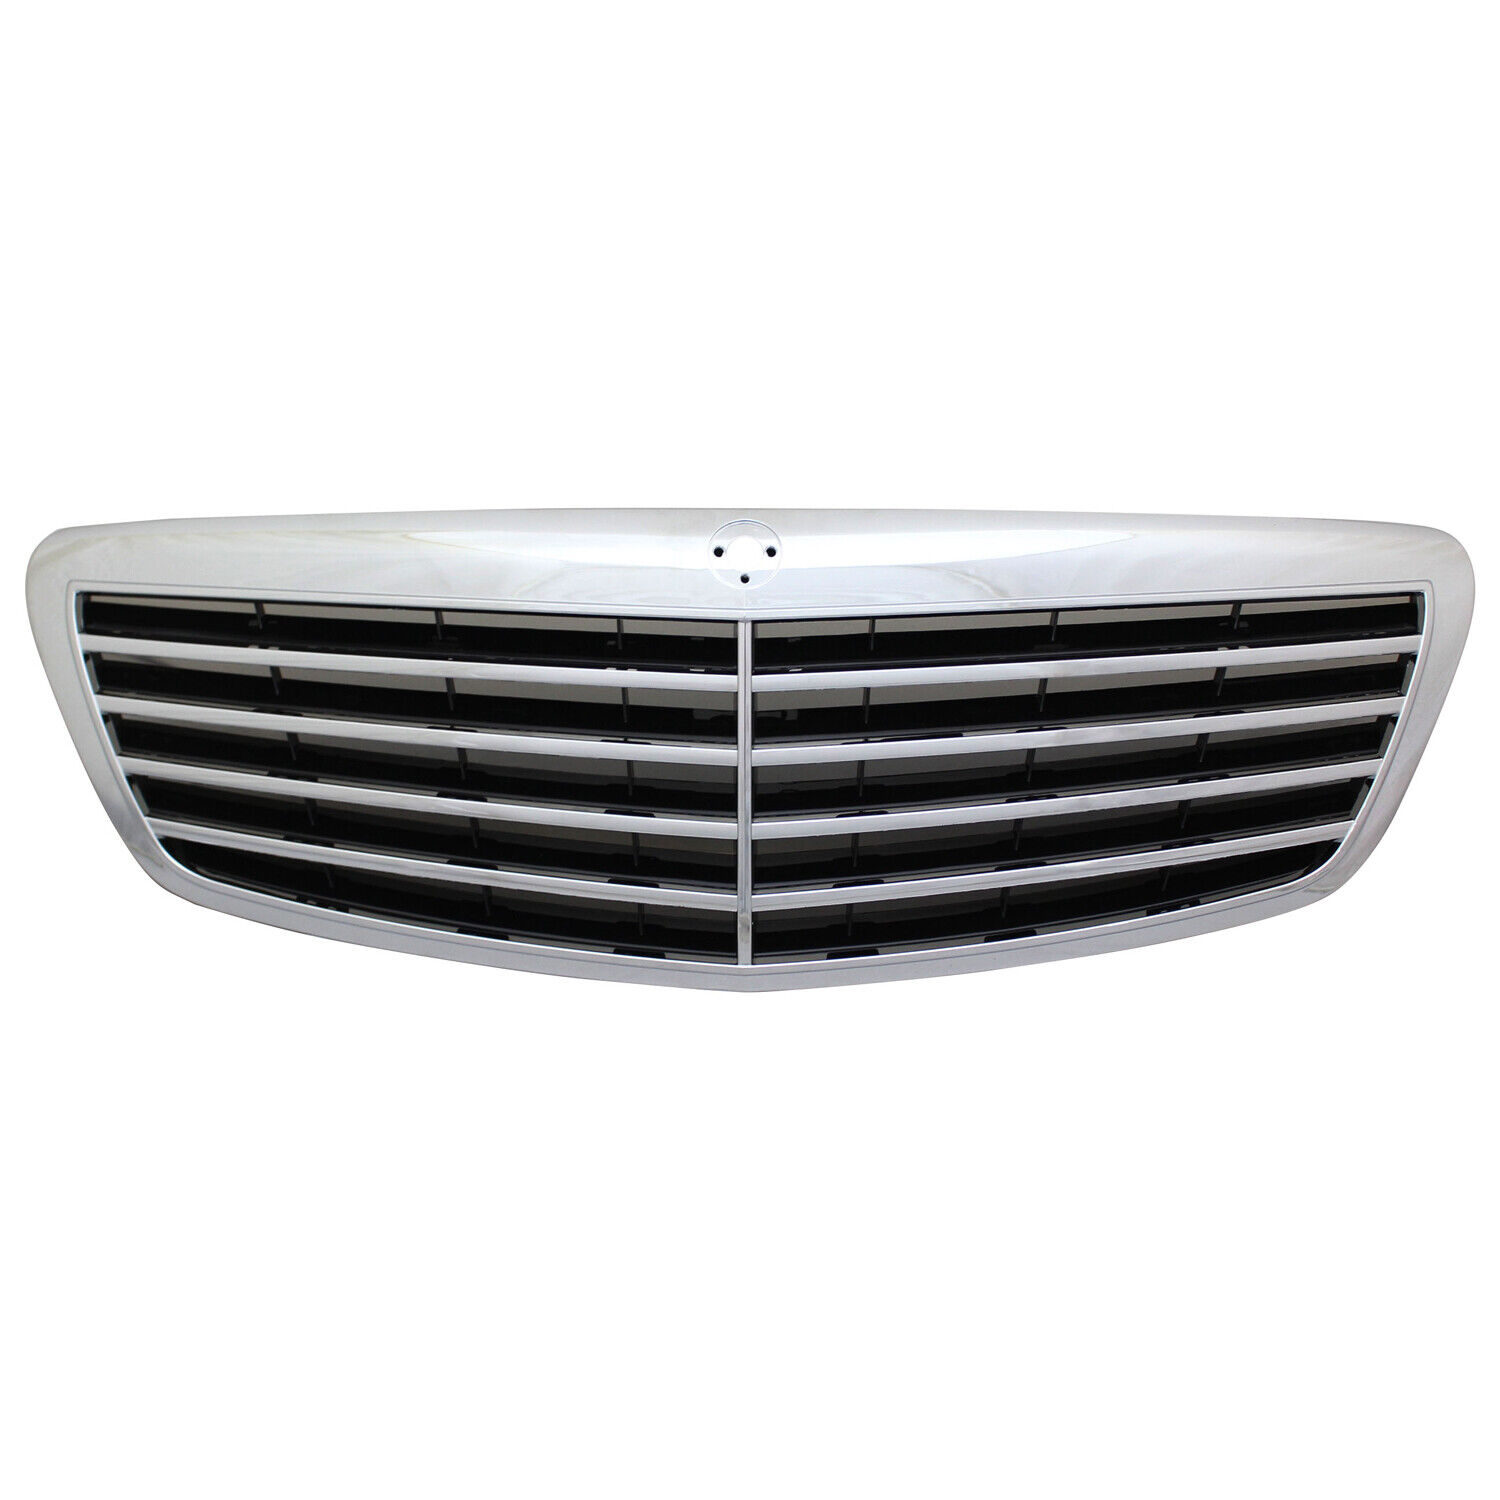 MB1200136 NEW Black Grille with Chrome Molding Fits 2007-2009 Mercedes S550